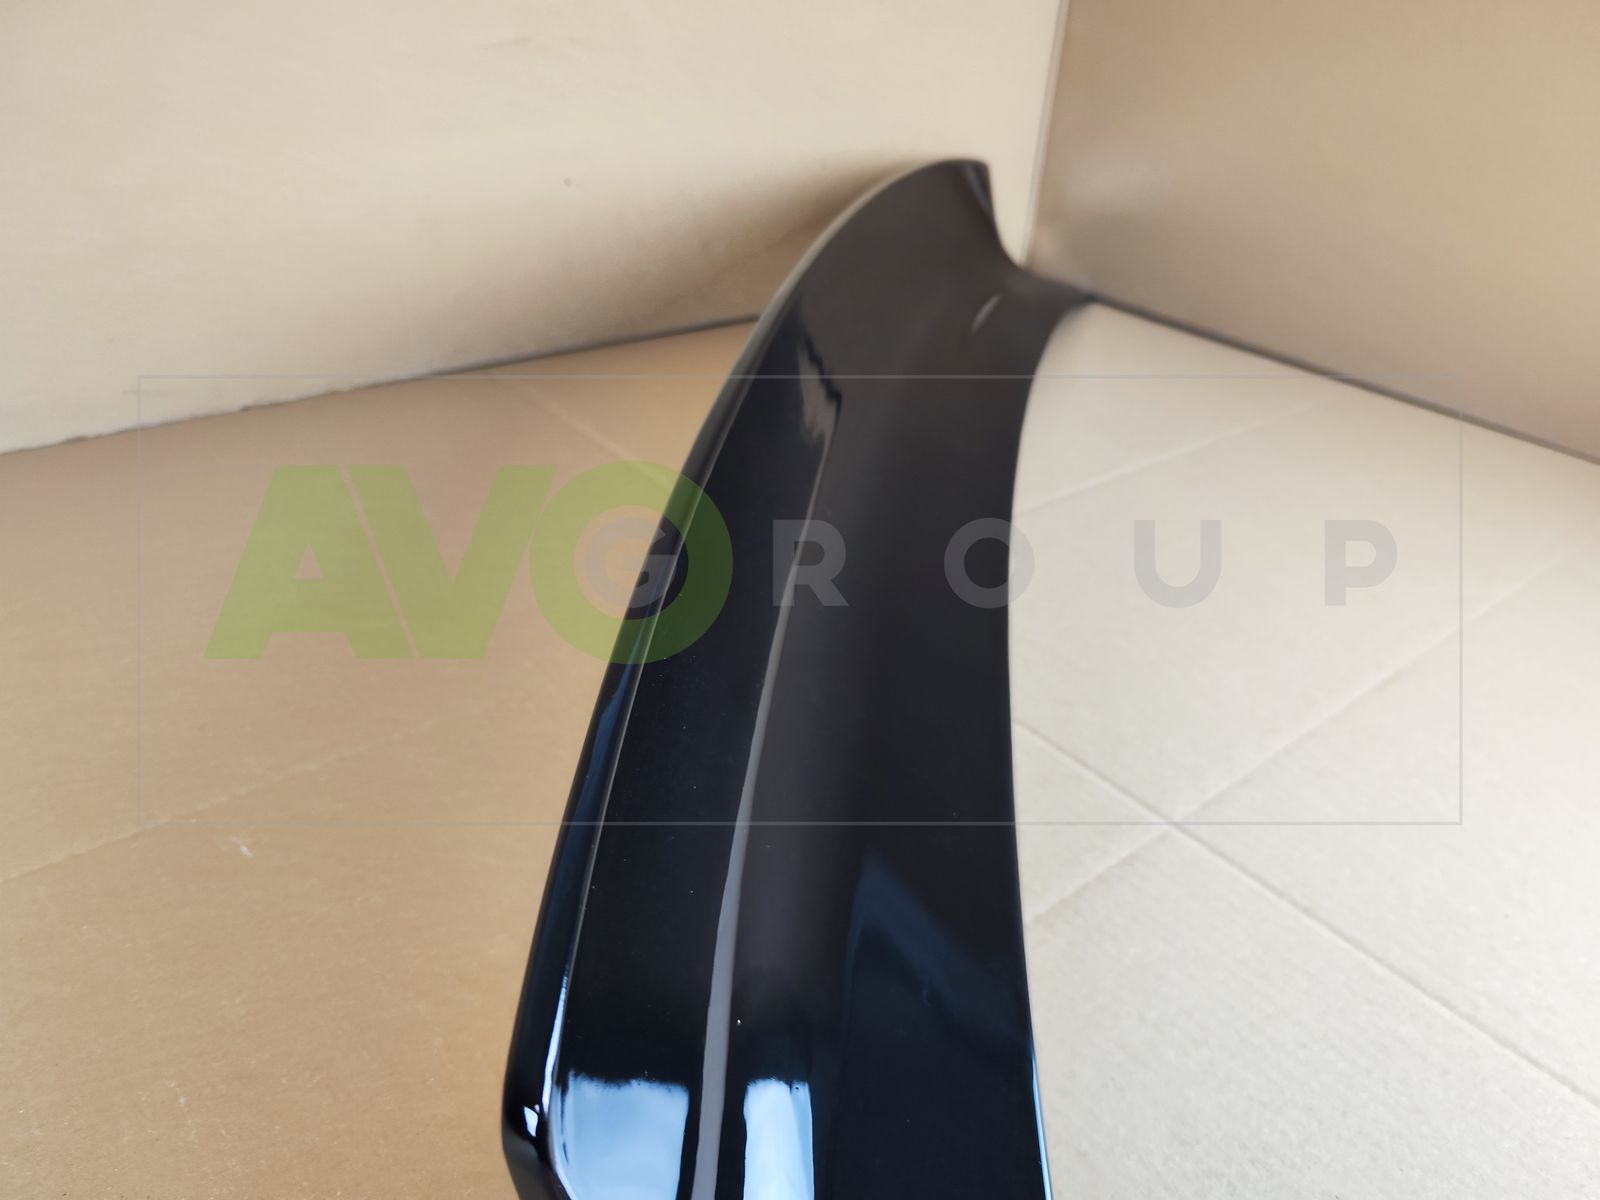 P style drift ducktail spoiler for BMW 3 E46 99-06 Coupe ABS Gloss